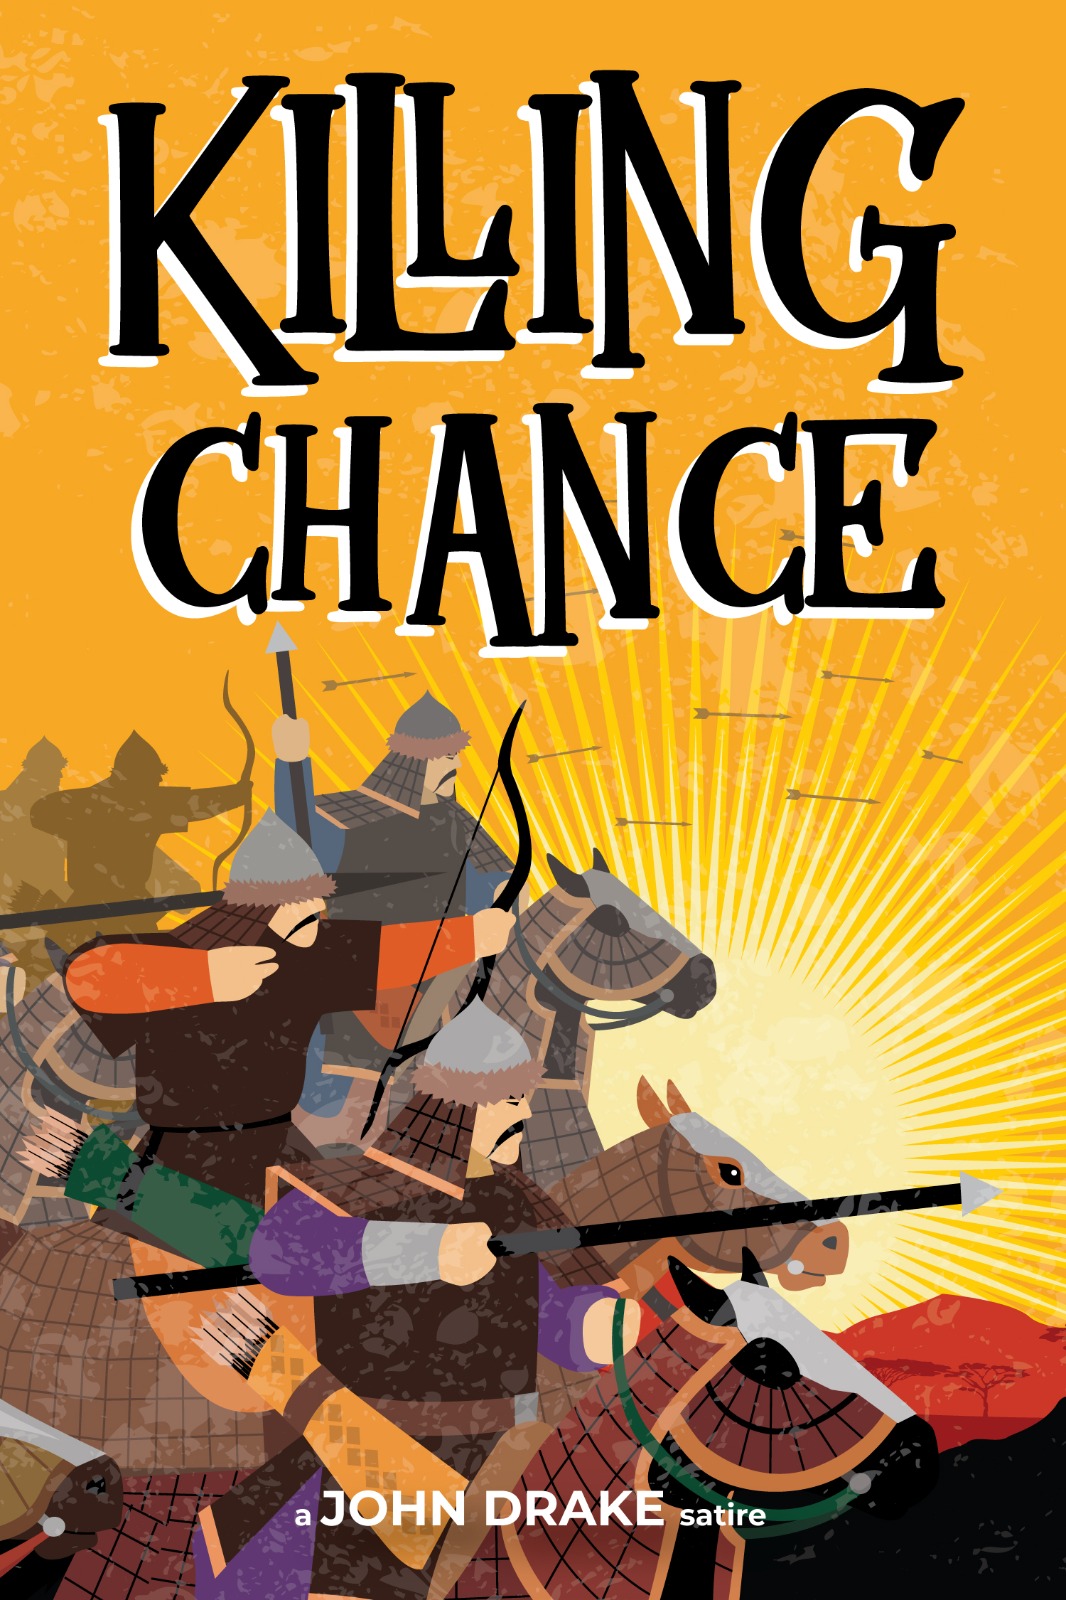 Killing Chance by John Drake now available on Amazon